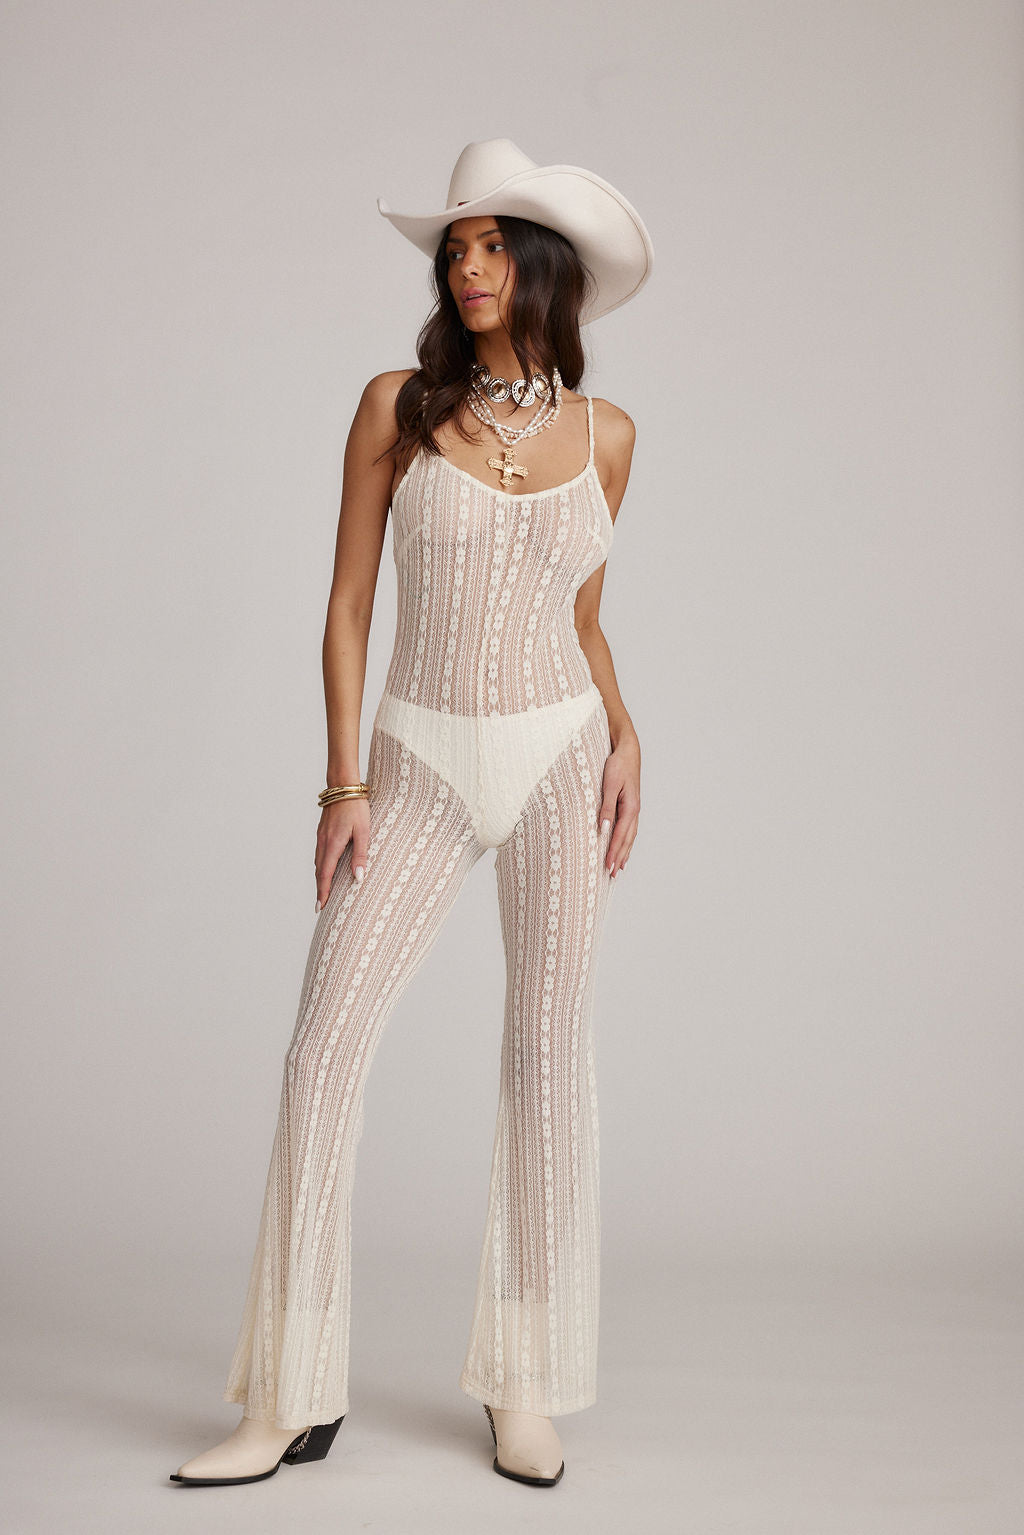 Hollow Cutout out See-through Jumpsuit – York & Dante